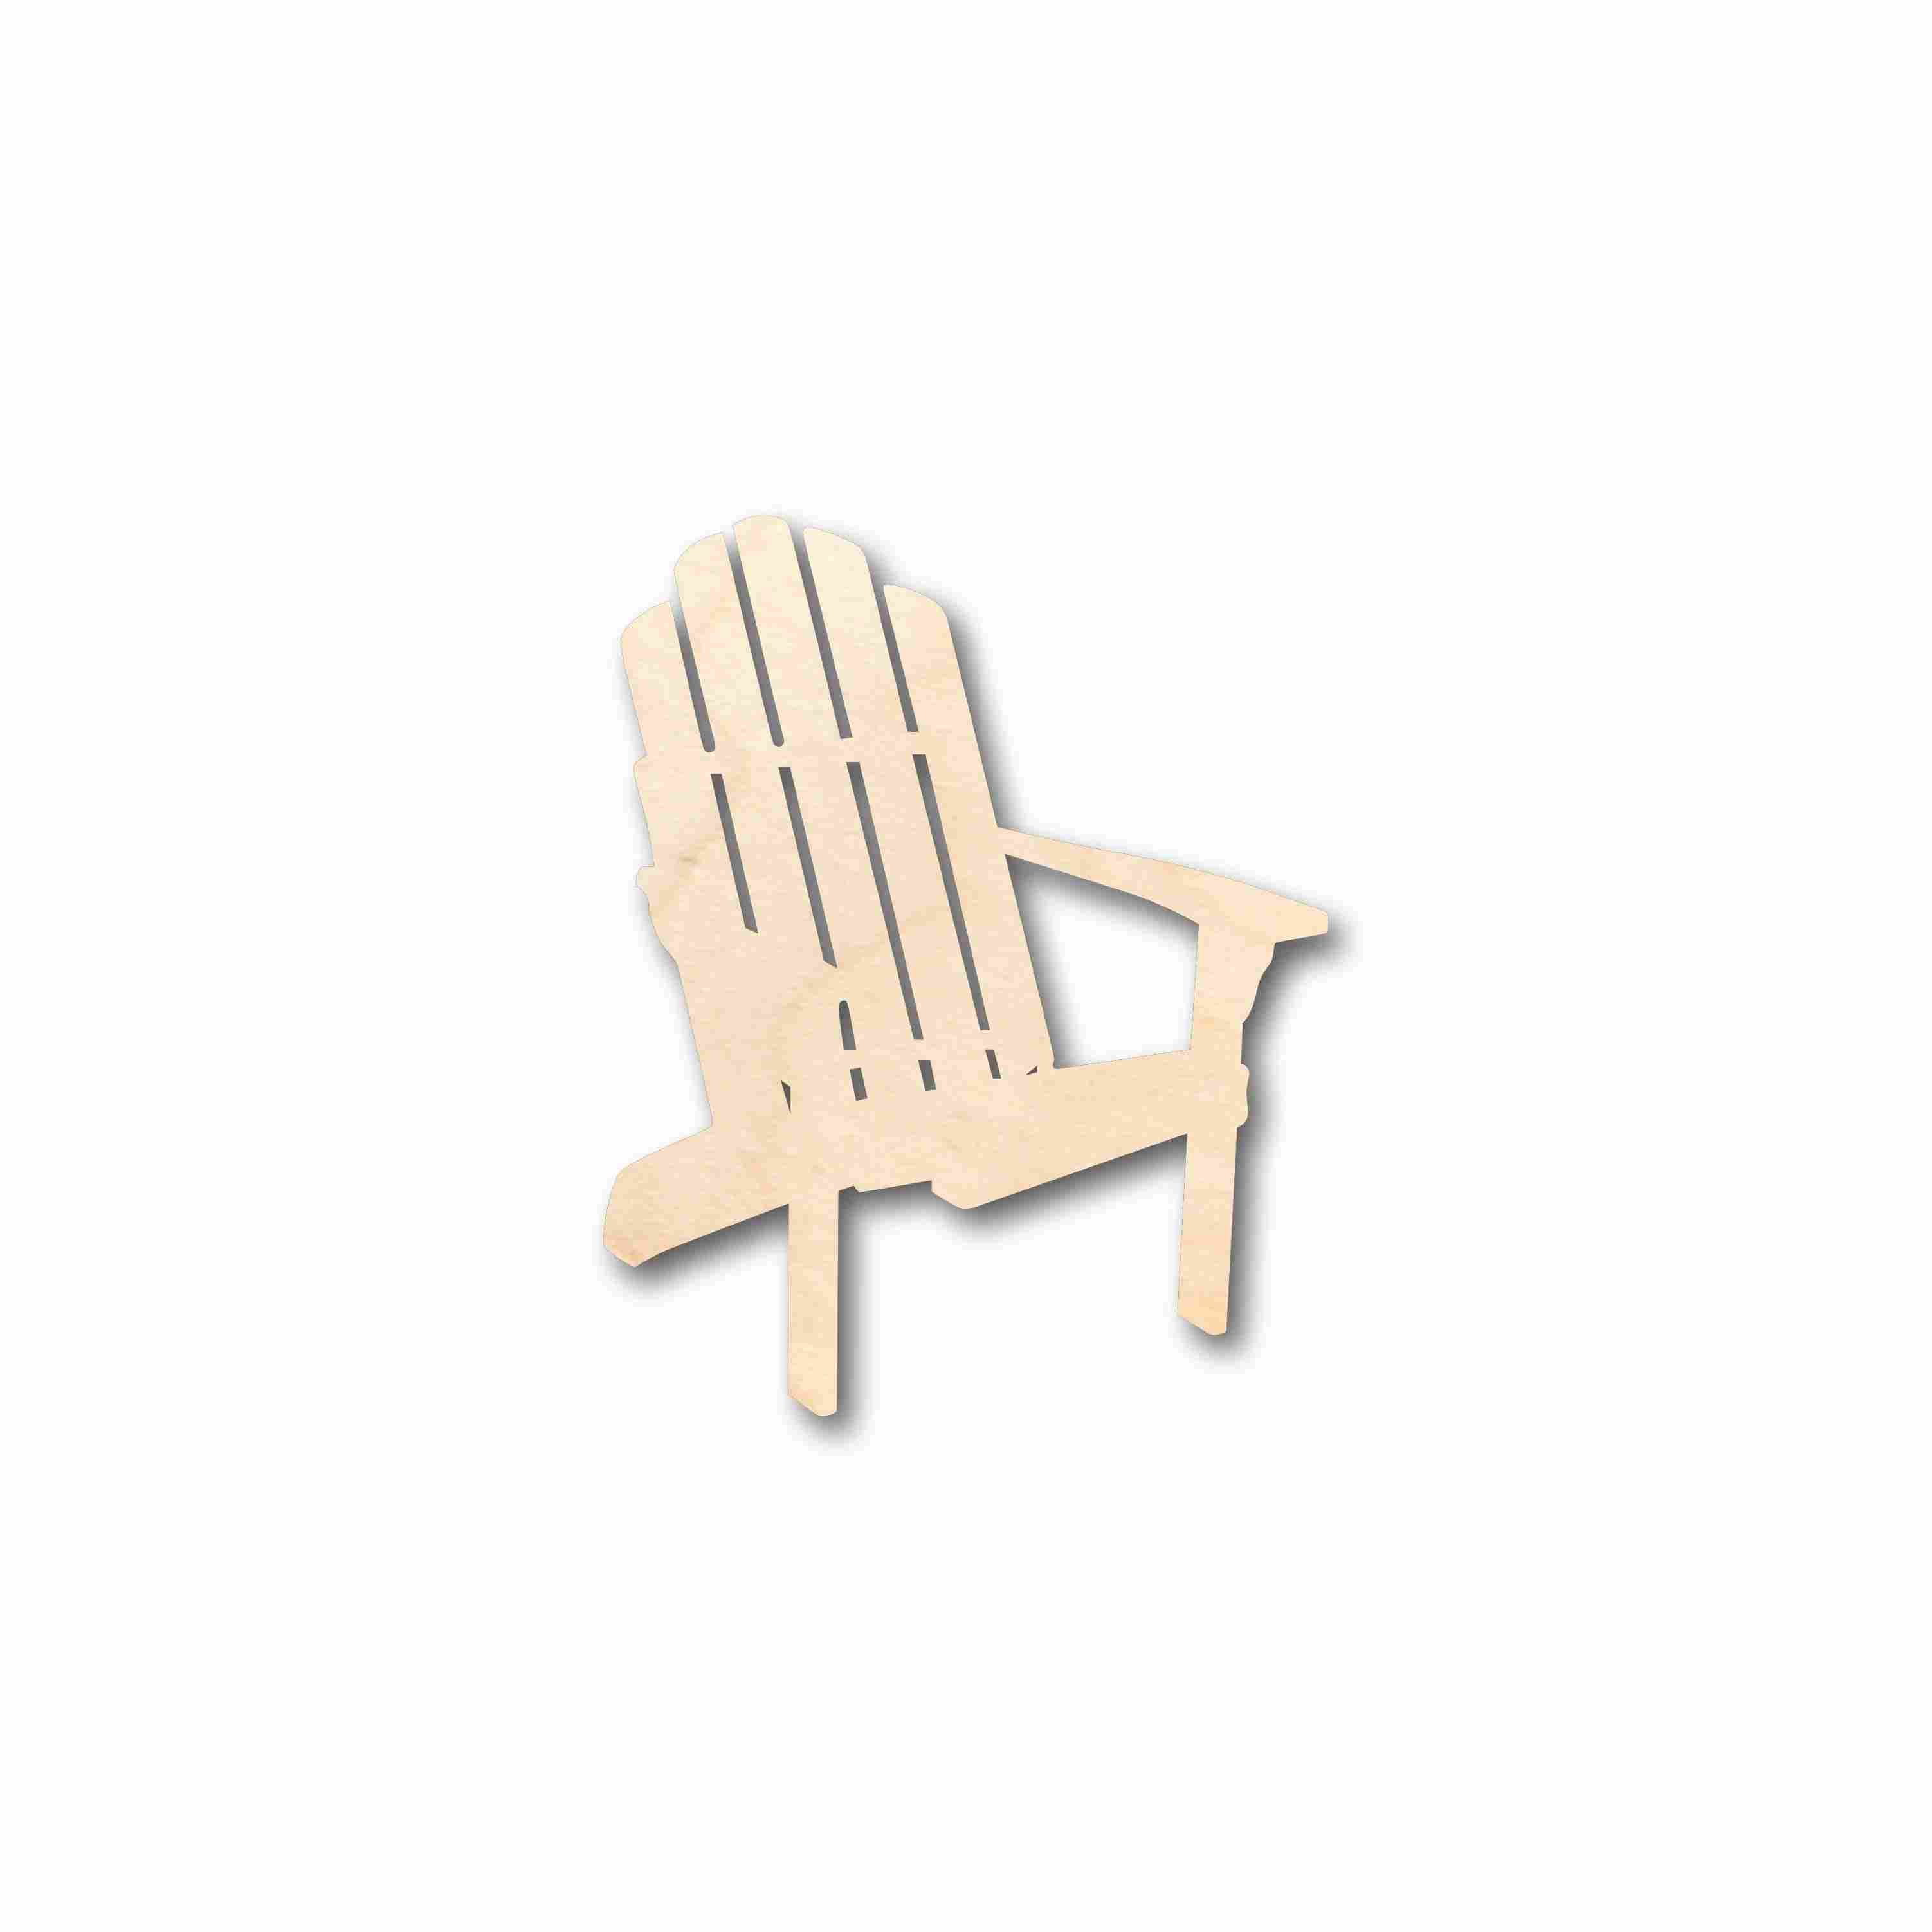 Tall Unfinished Fir Wood Adirondack Chair 